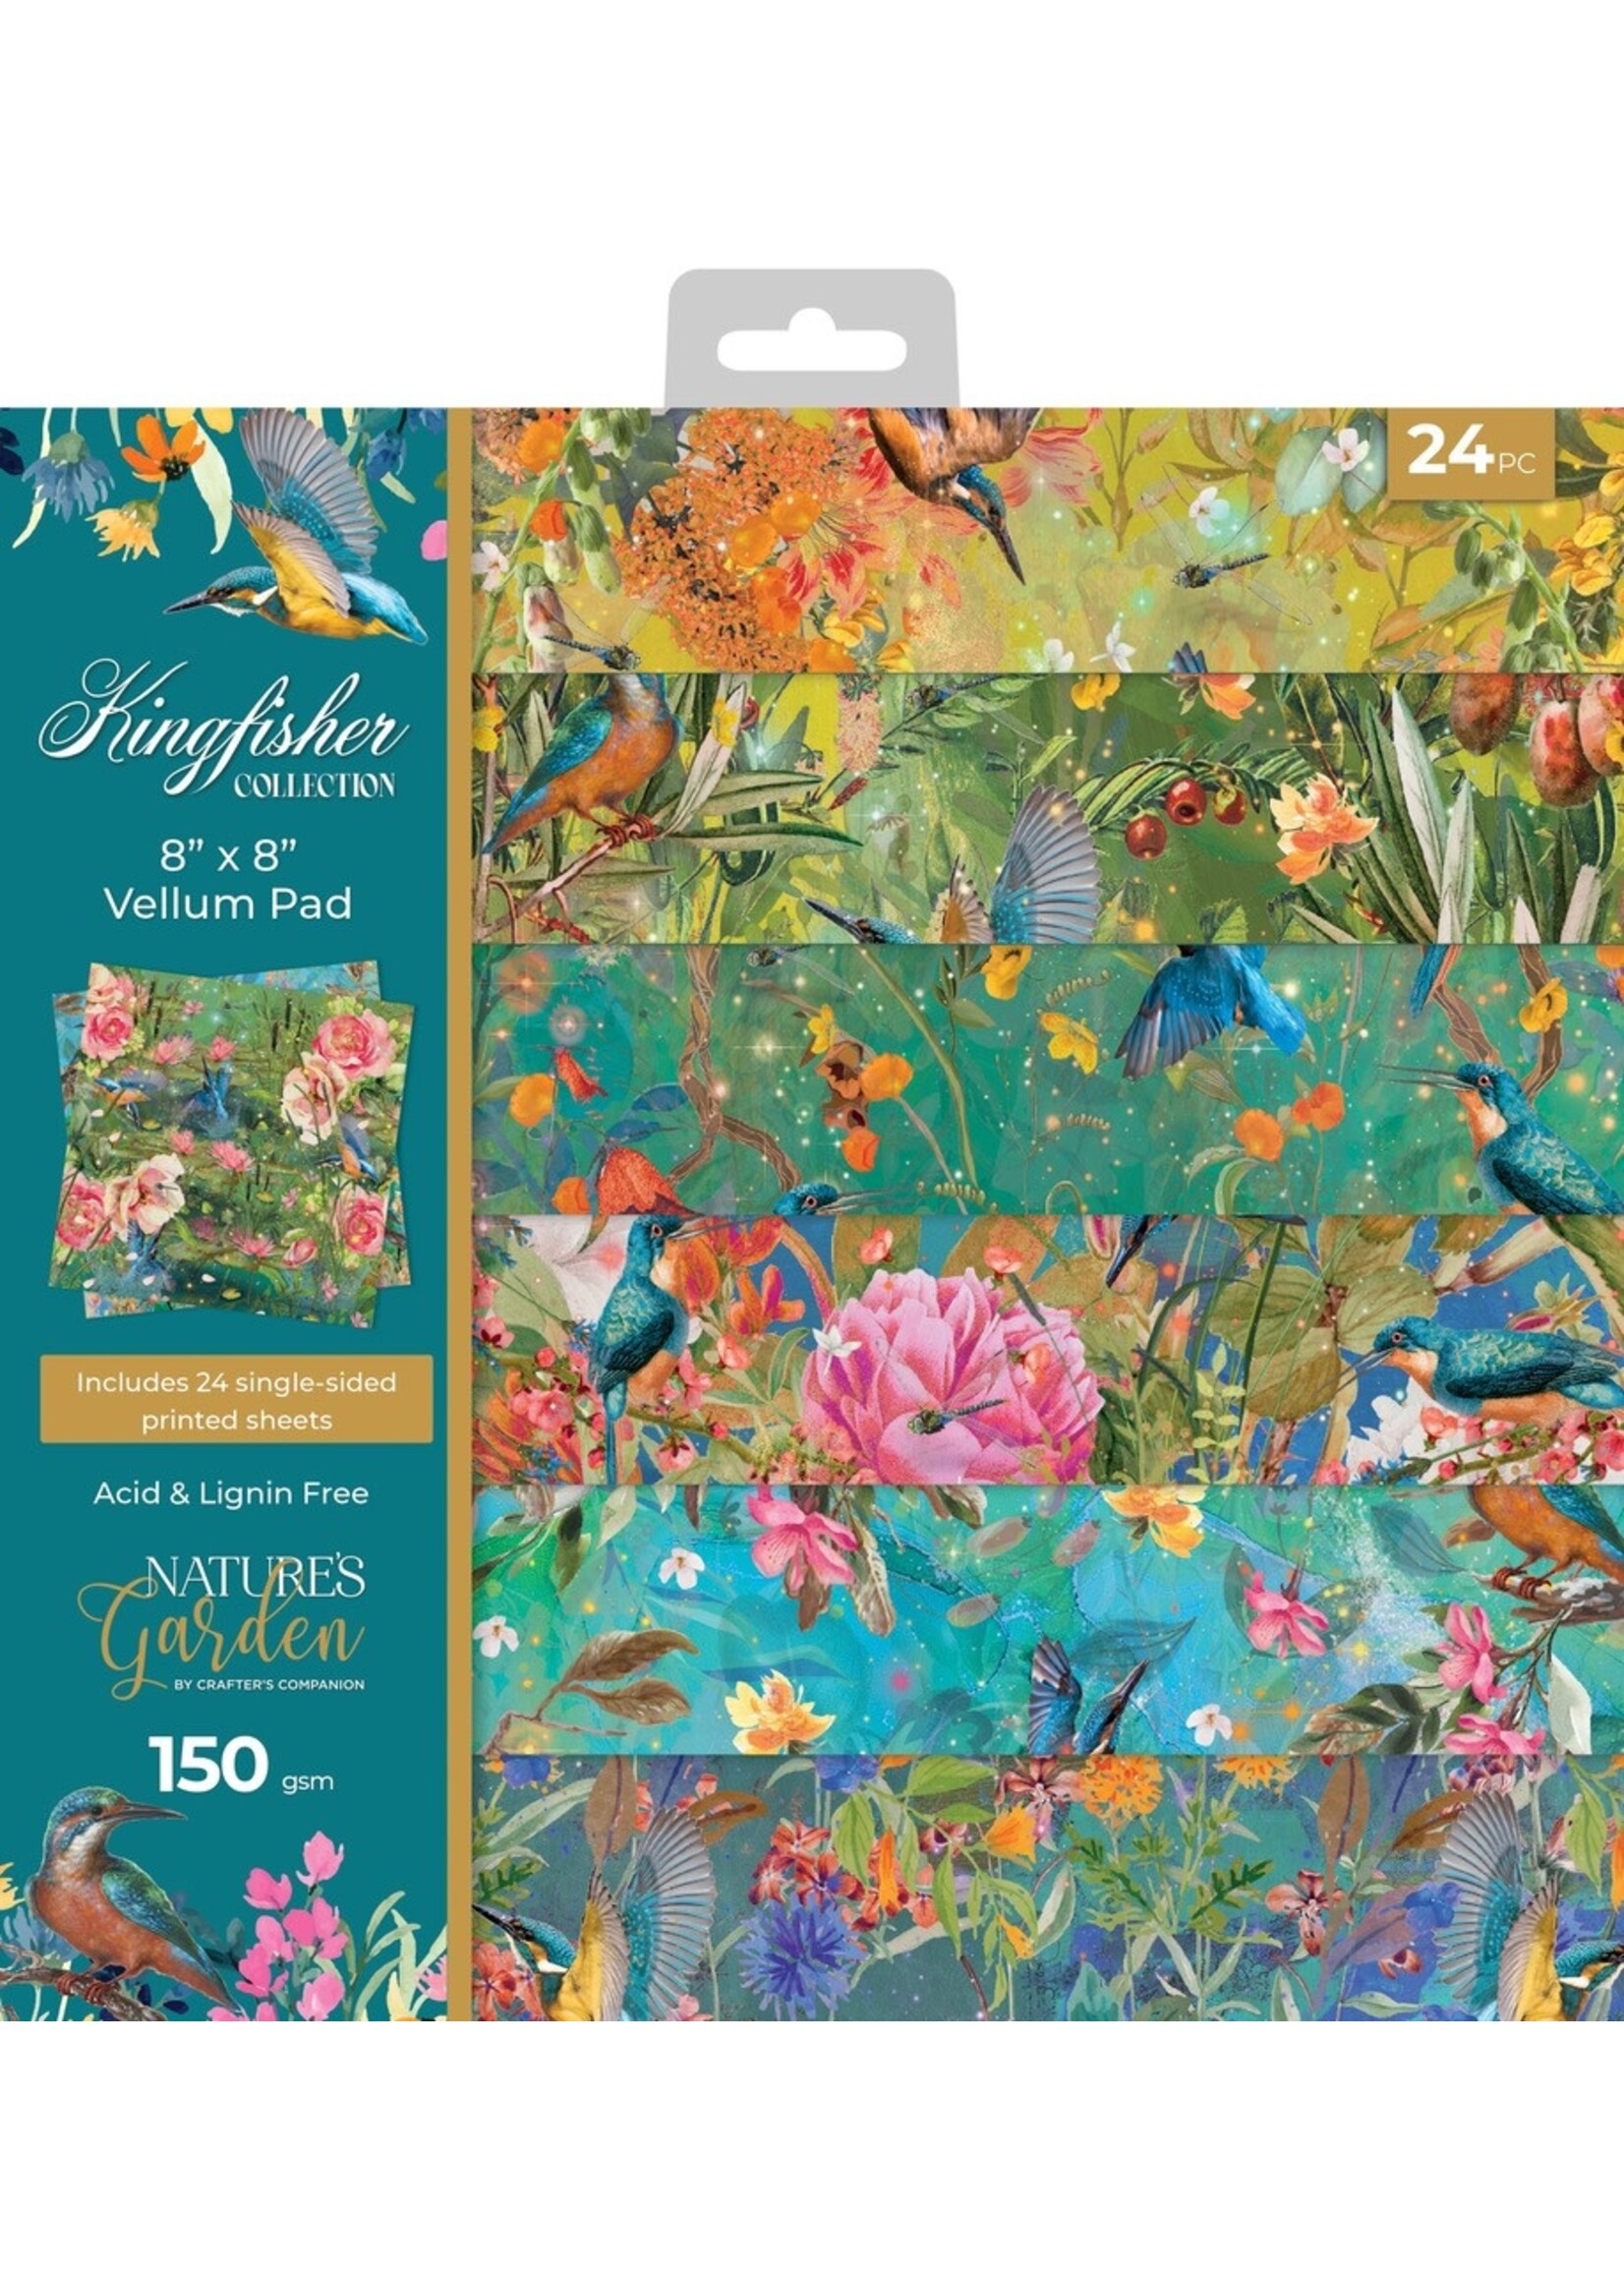 Crafter's Companion Nature's Garden 8x8 Vellum Pad, Kingfisher Collection